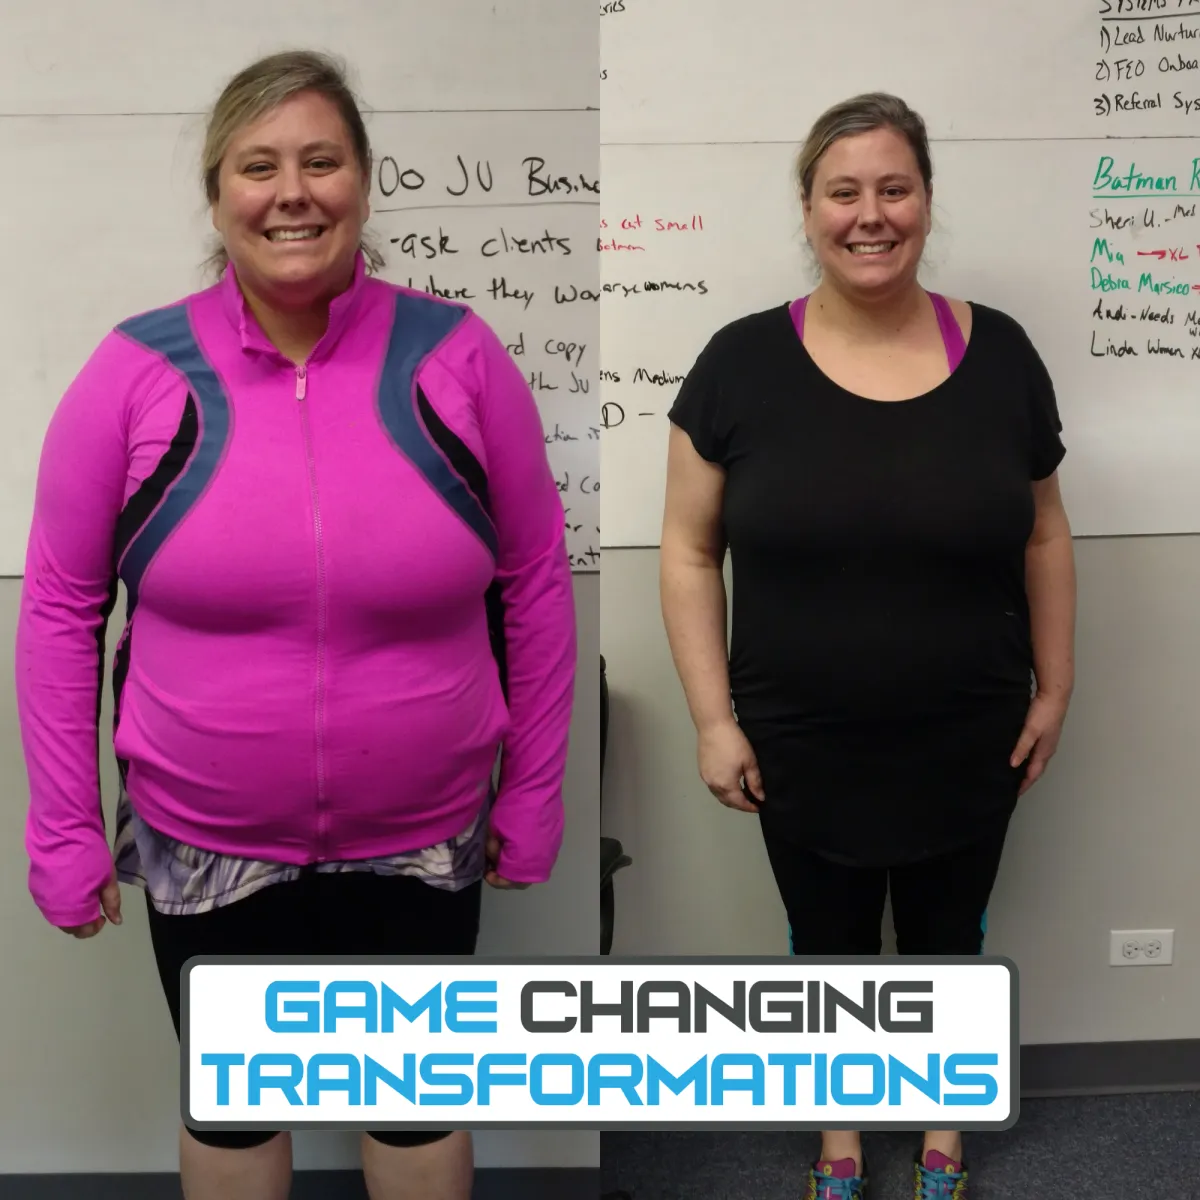 Another amazing weight loss transformation near Wauconda IL